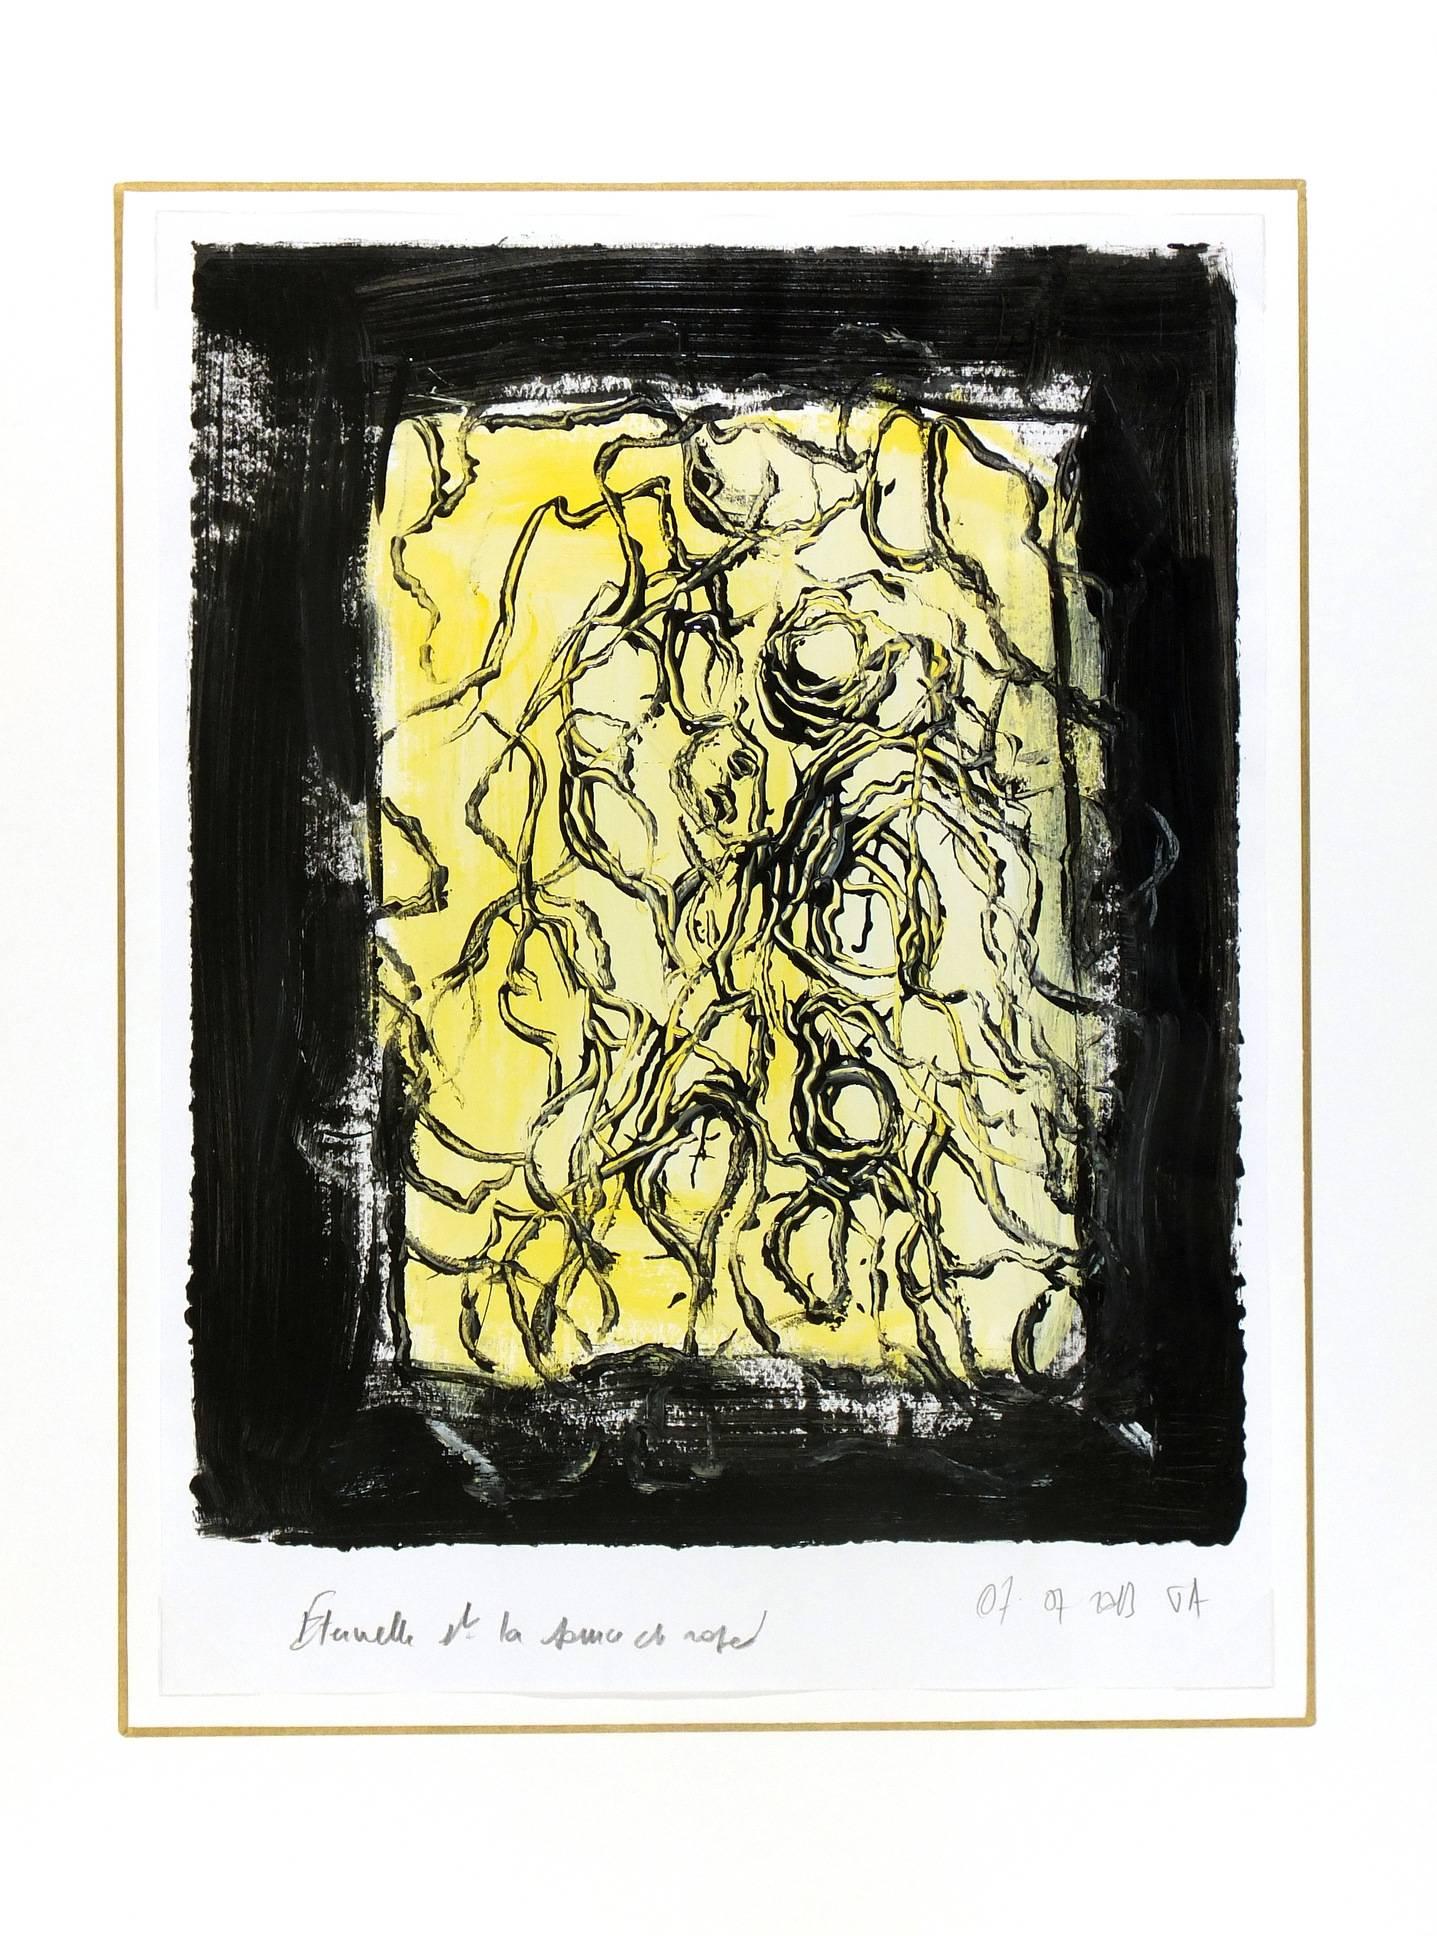 French abstract acrylic painting combing a glowing shade of yellow with deep black by artist Jacques Alary, 2013. Initialed and dated lower right and titled lower left.
Original artwork on paper displayed on a white mat with a gold border. Mat fits